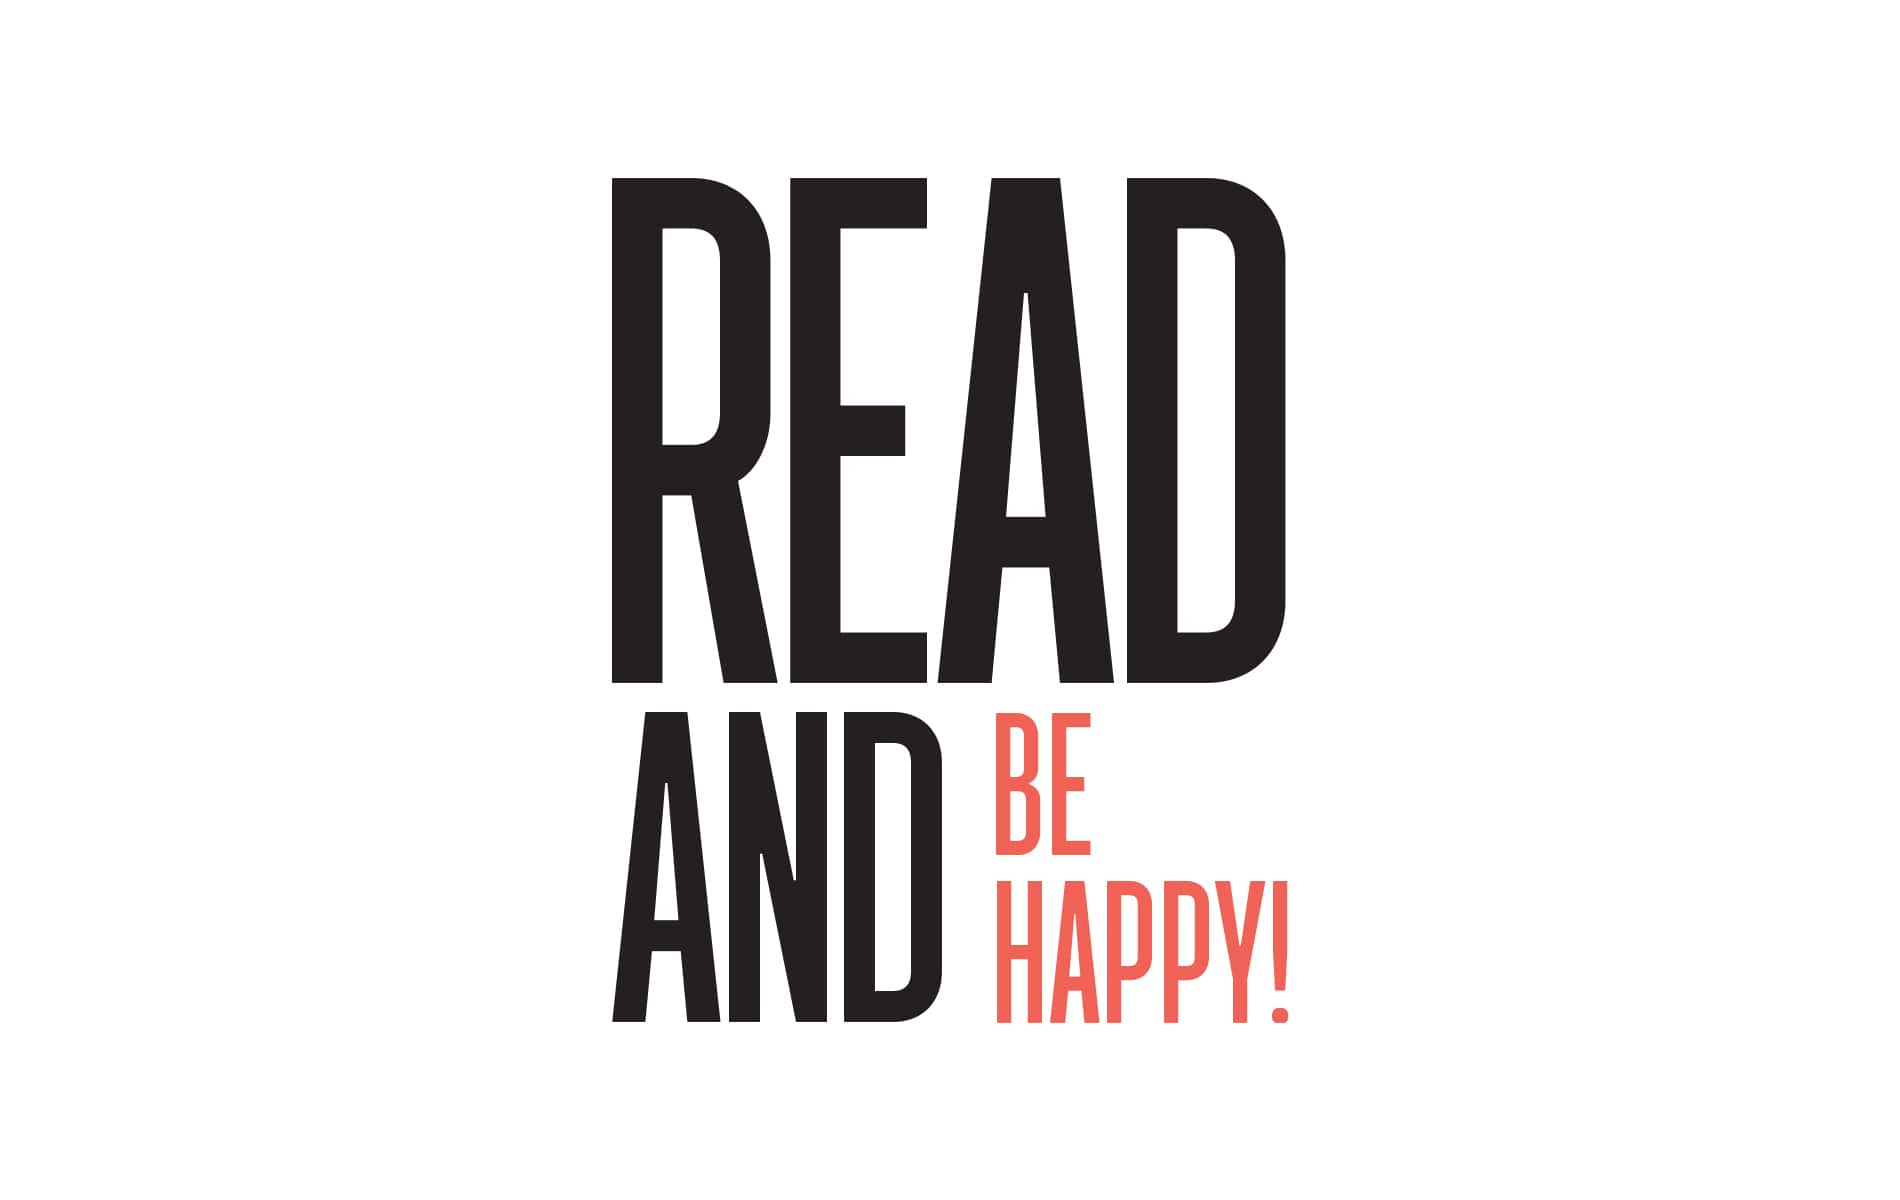 Read and Be Happy!